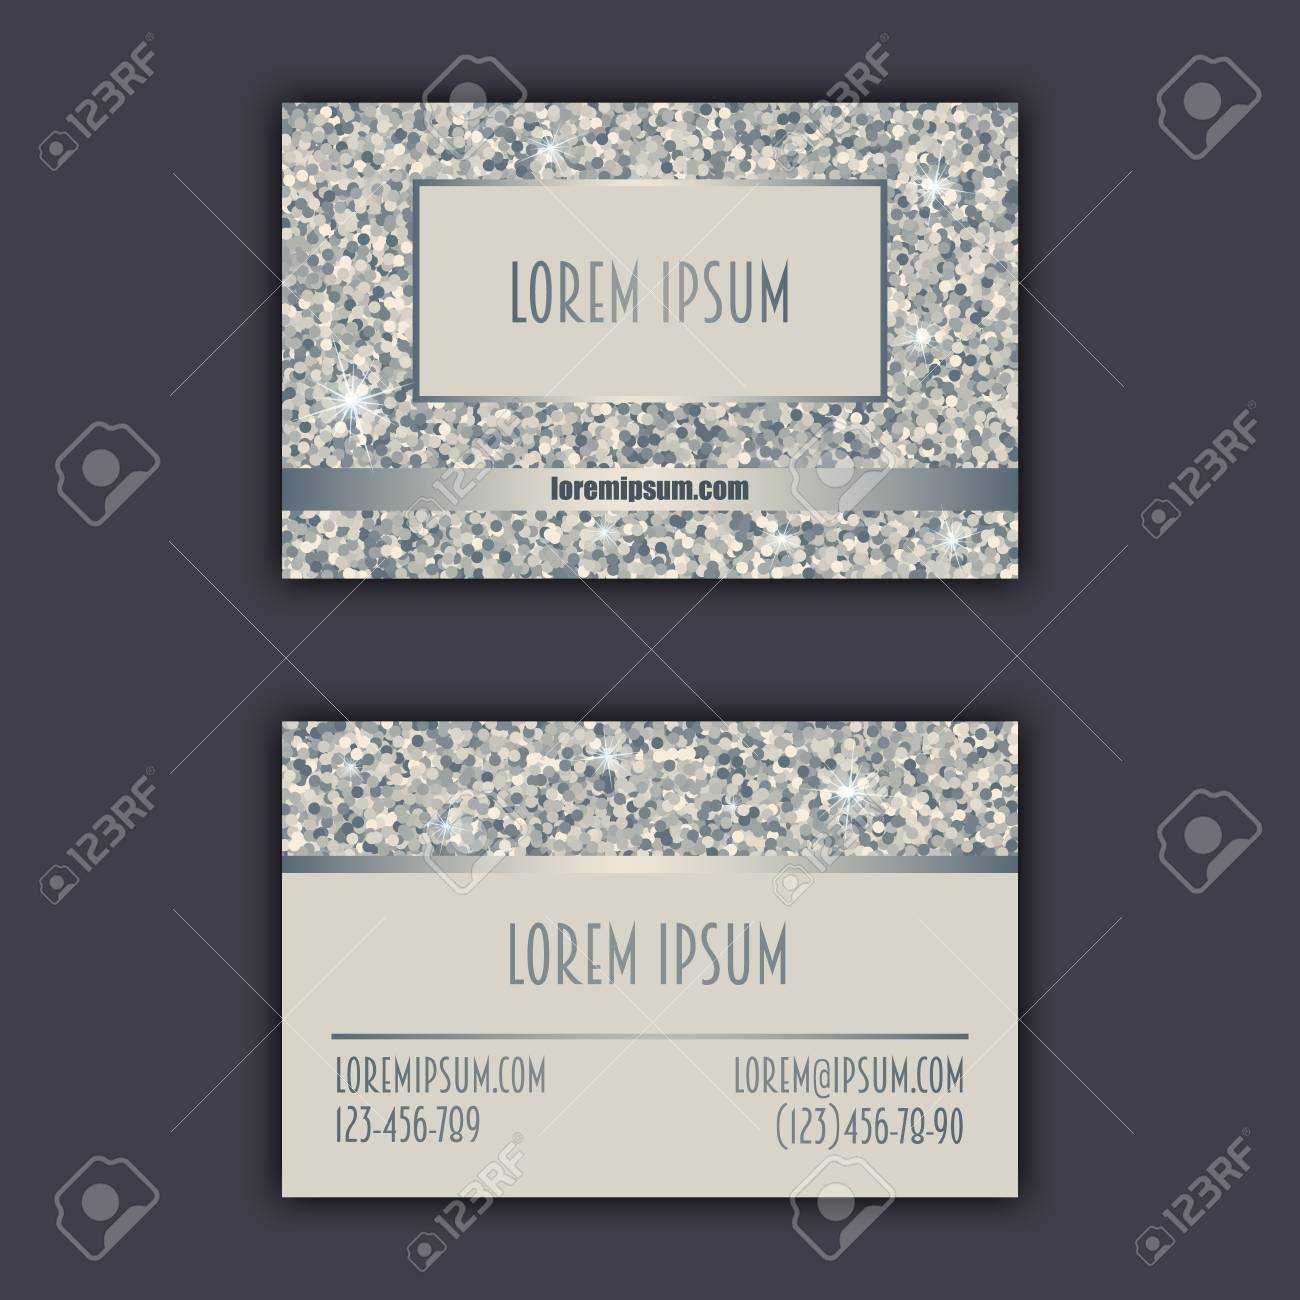 Business Card Templates With Glitter Shining Background. Within Christian Business Cards Templates Free